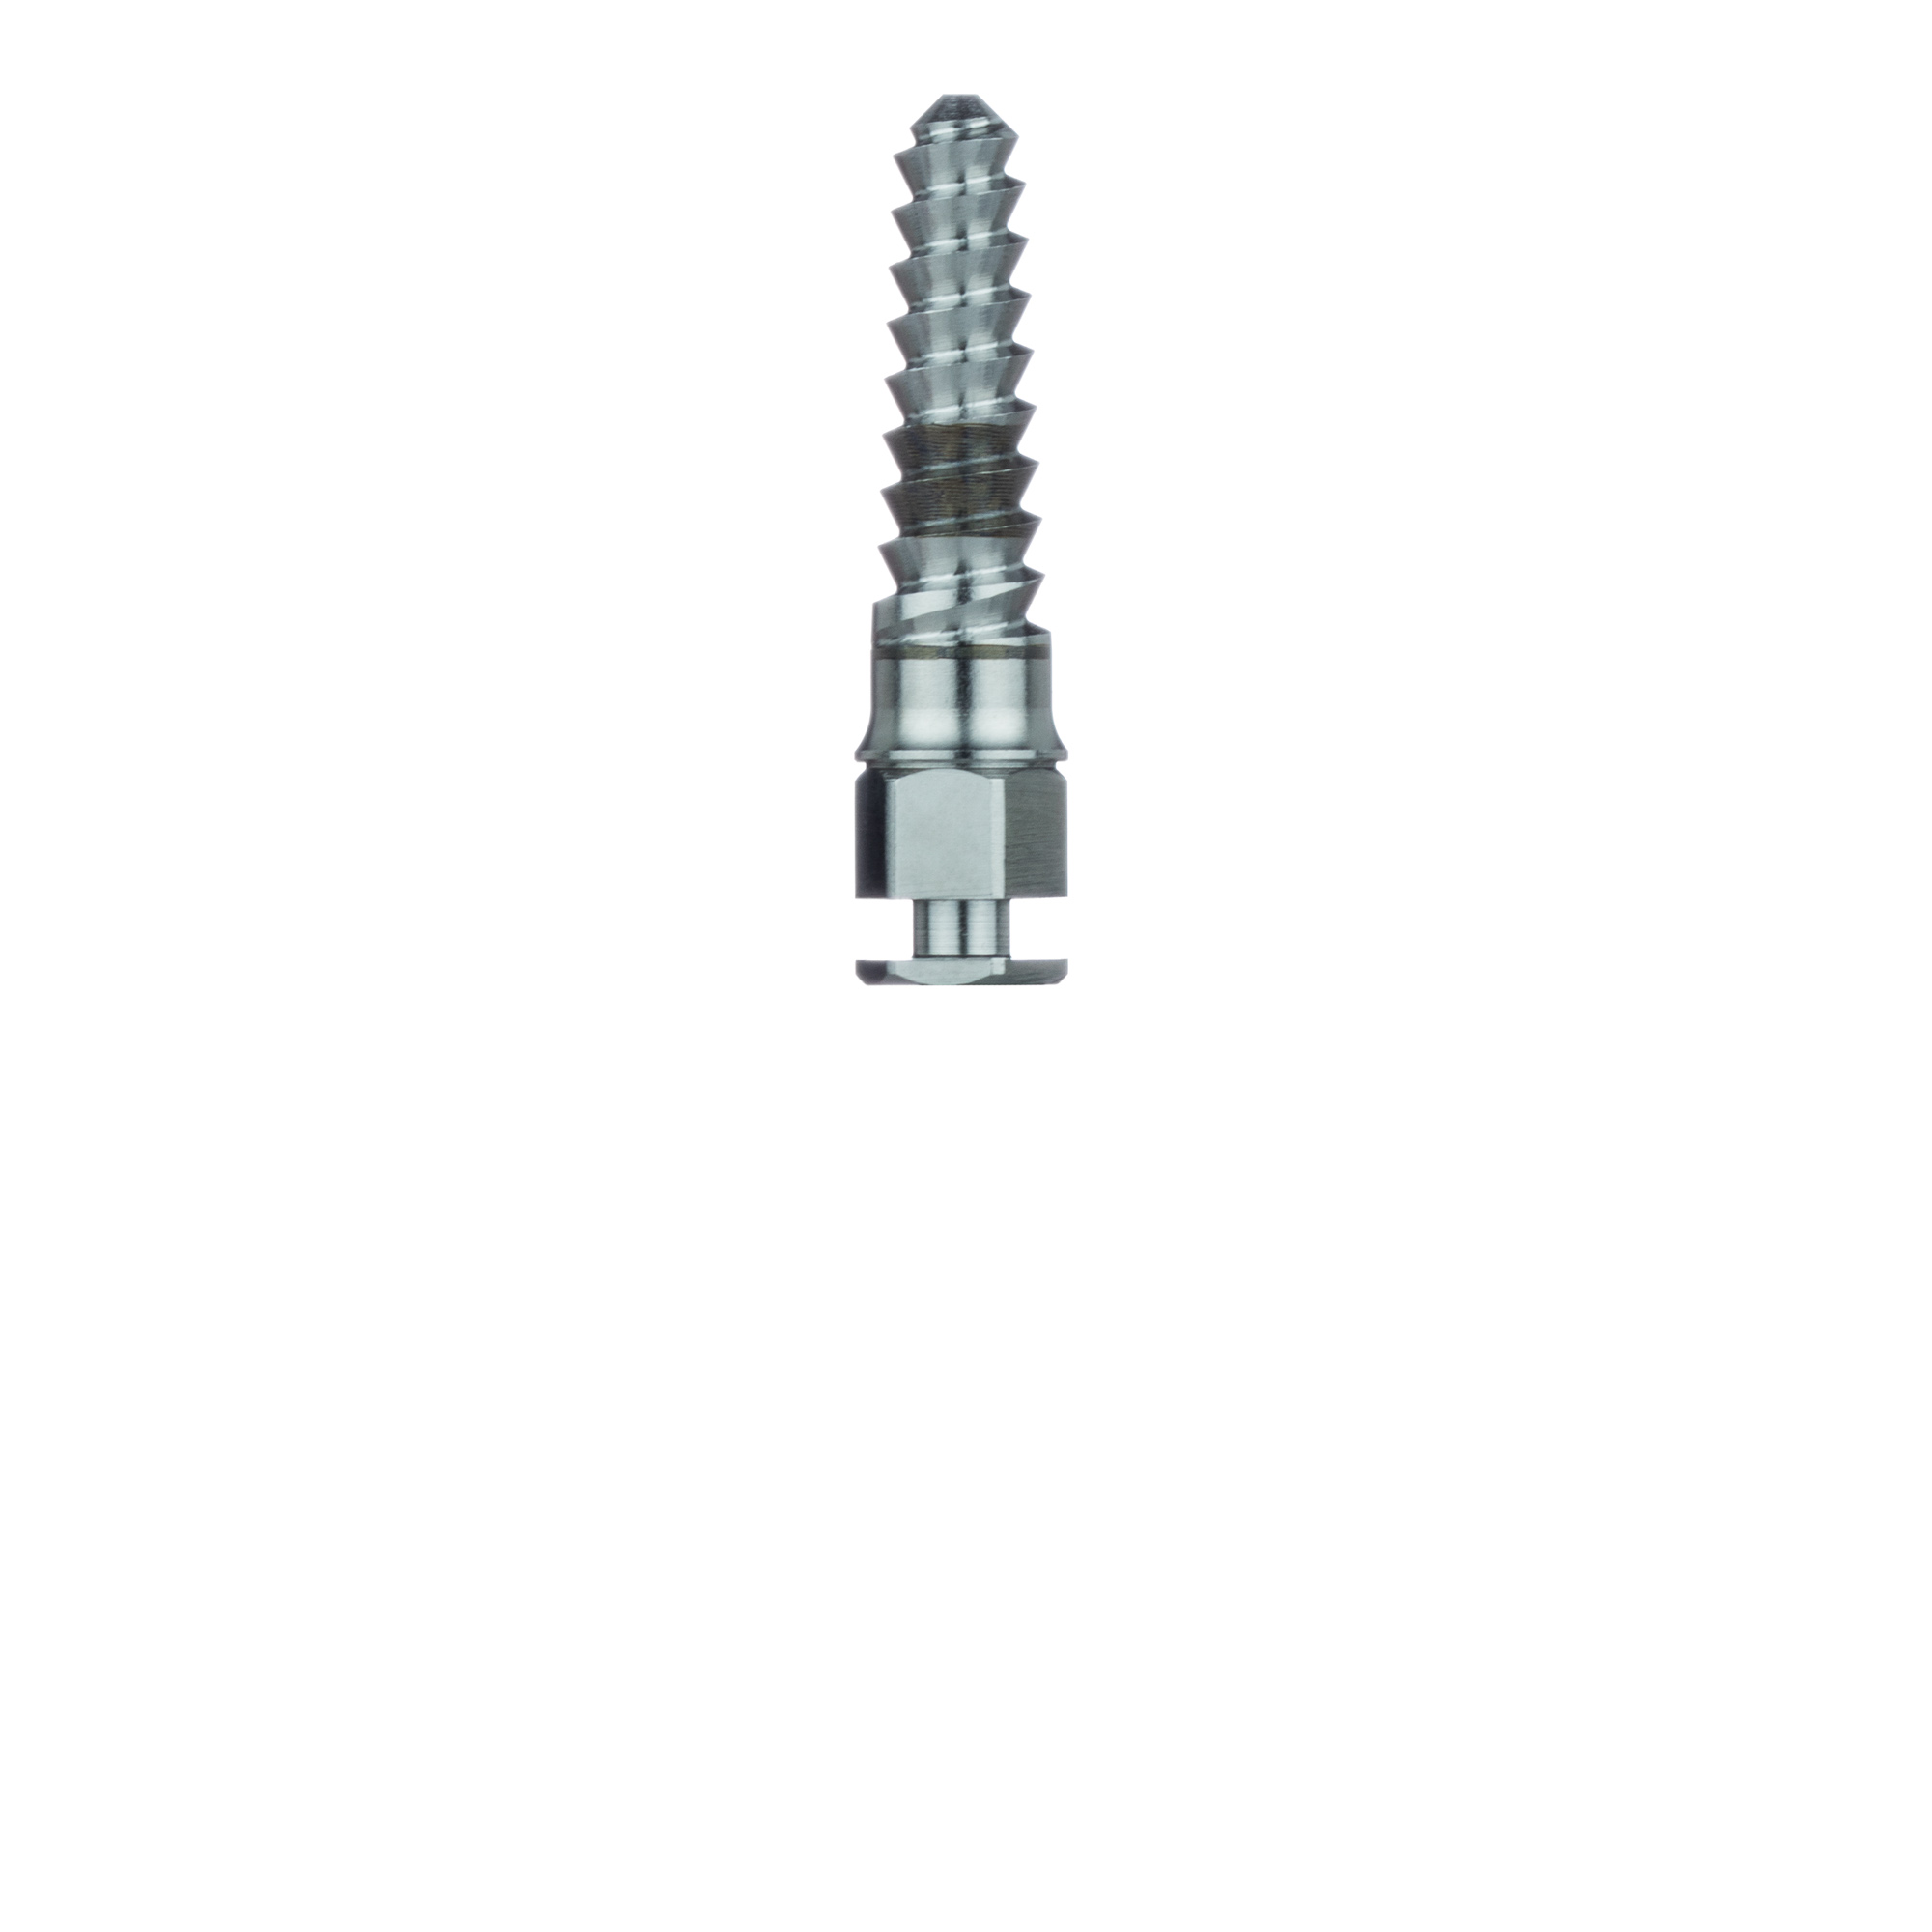 D3005 Surgery, Expansion Spreader, 3.3mm X 10mm